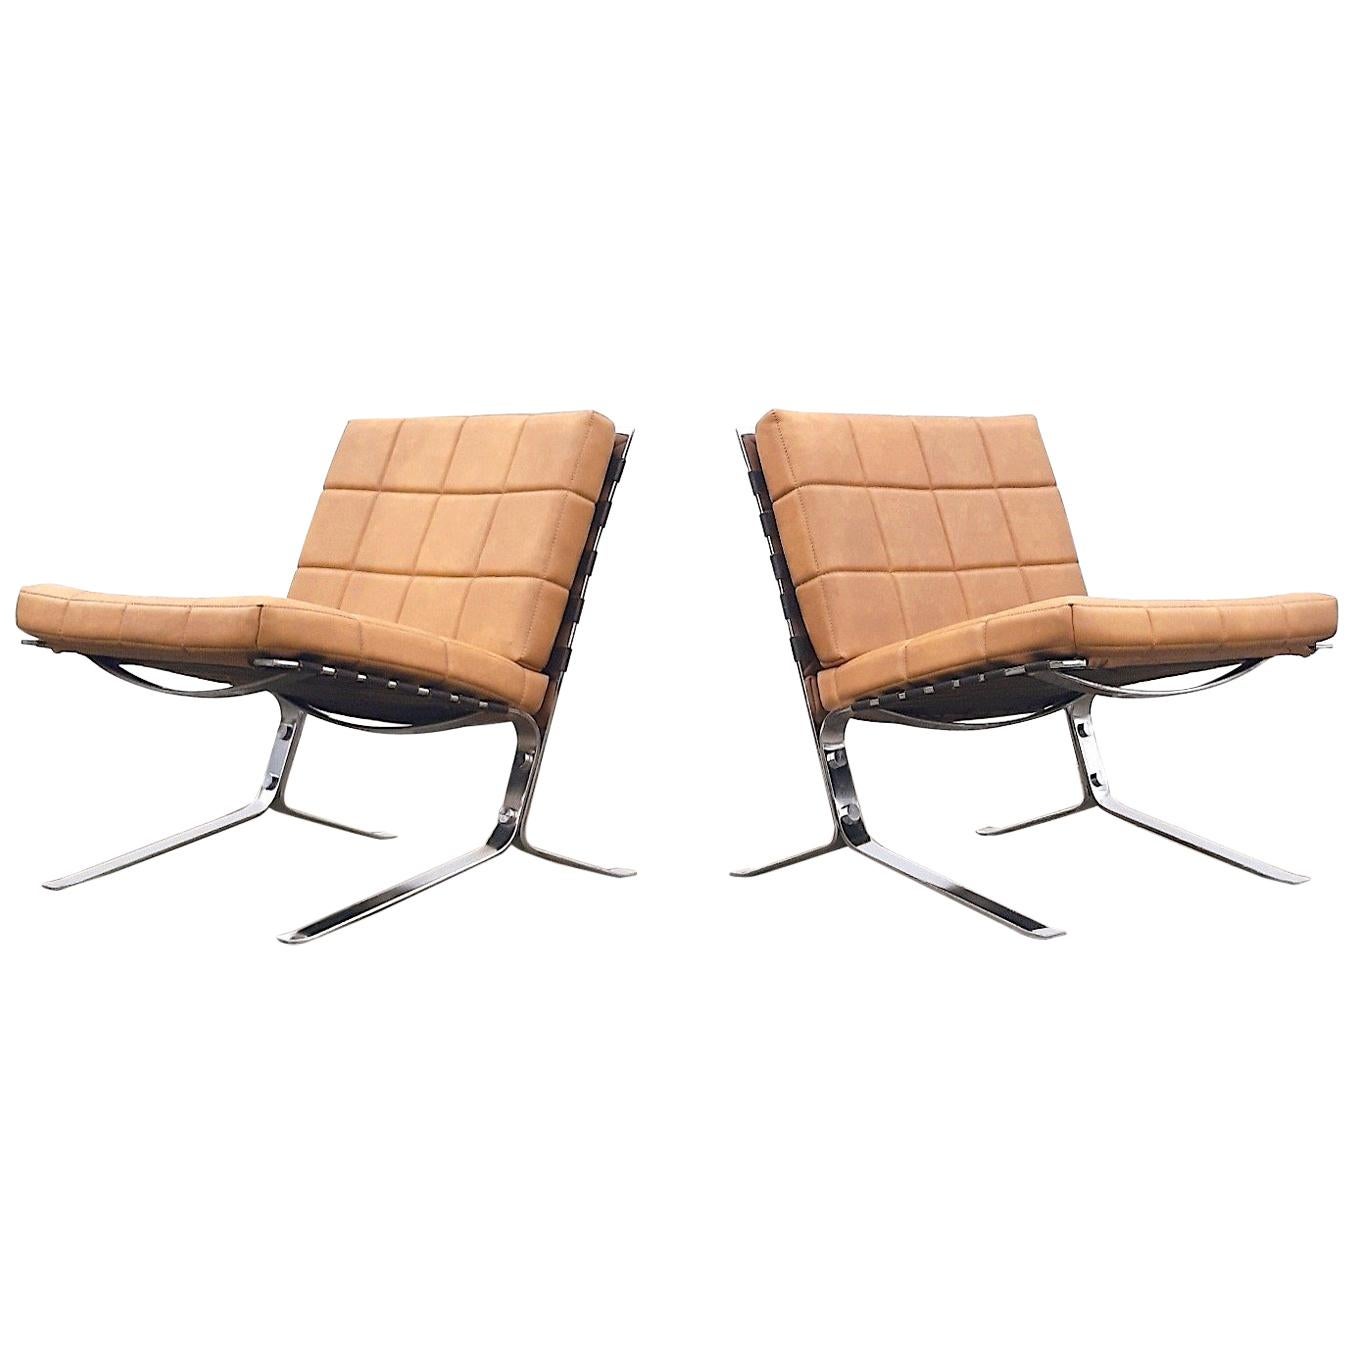 Pair of French Olivier Mourgue Beige “Joker” Easy Chairs for Airborne, 1960s For Sale